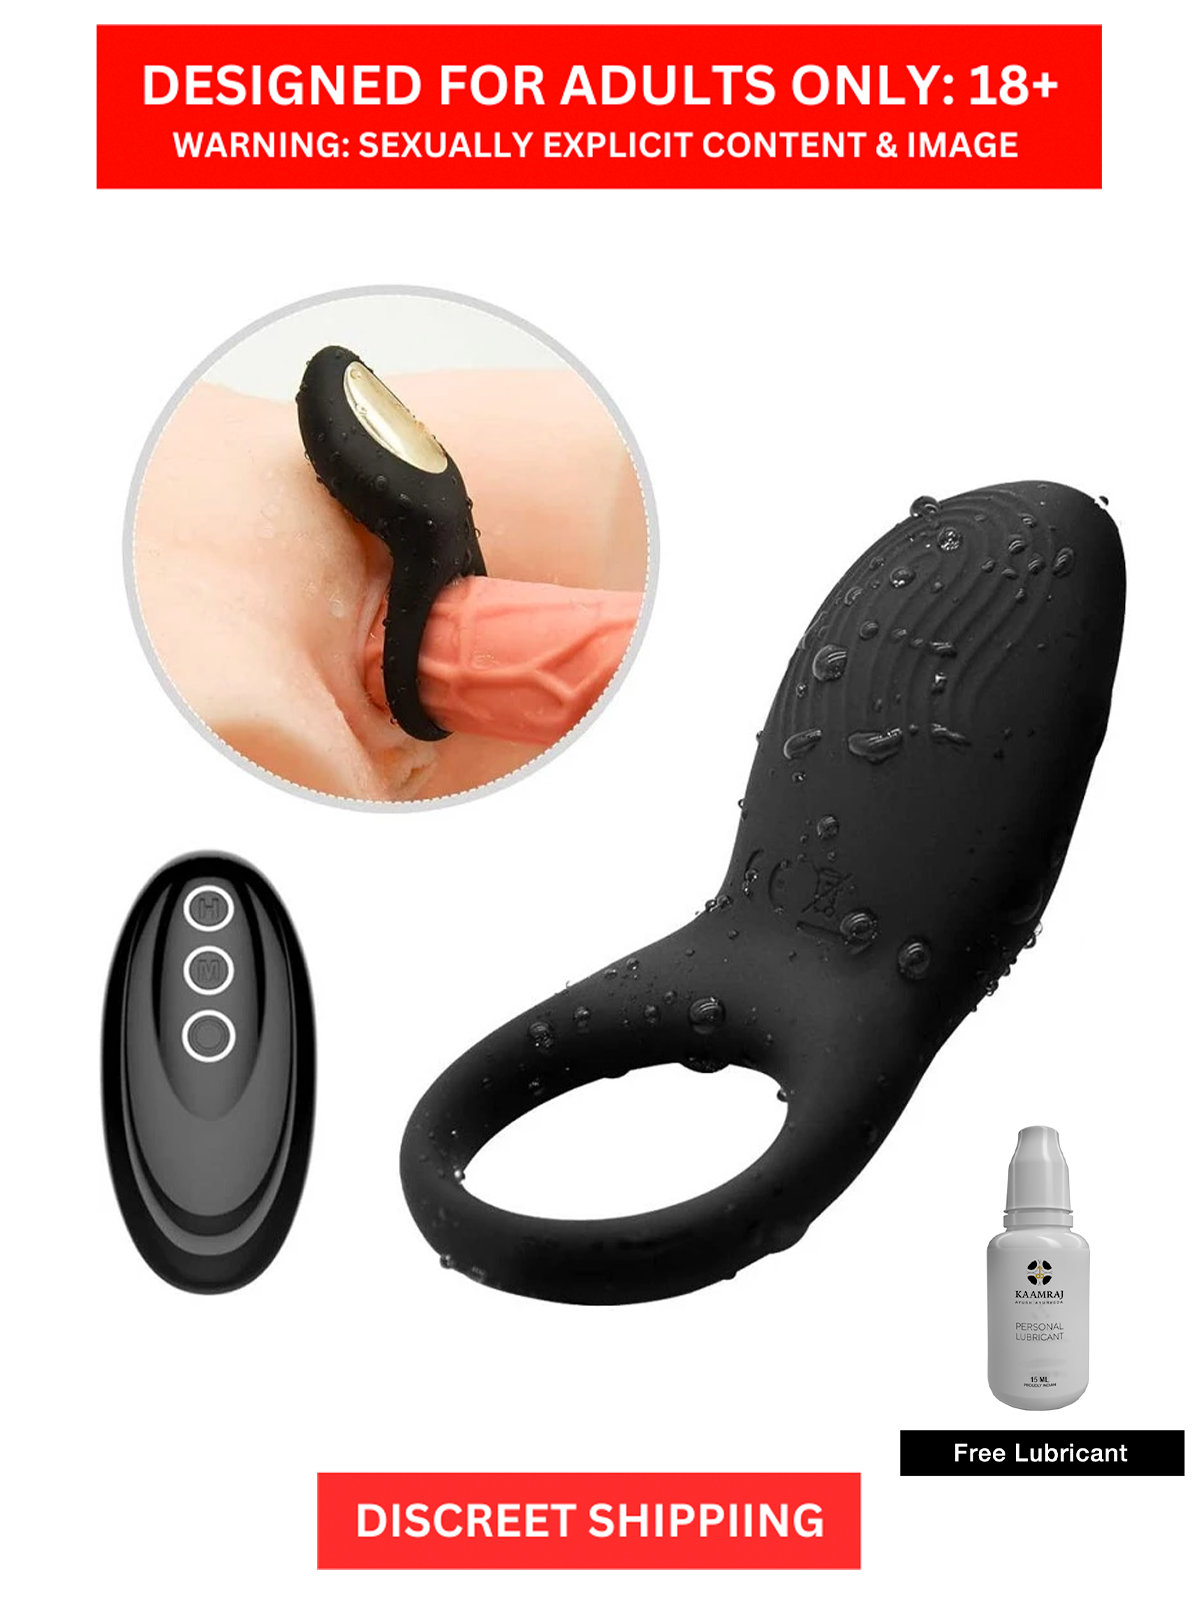     			Highly Recommended Black Color USB Charging Vibrating Wireless Remote Control Cock Ring with High Quality Soft Silicone and Free Kaamraj Lube